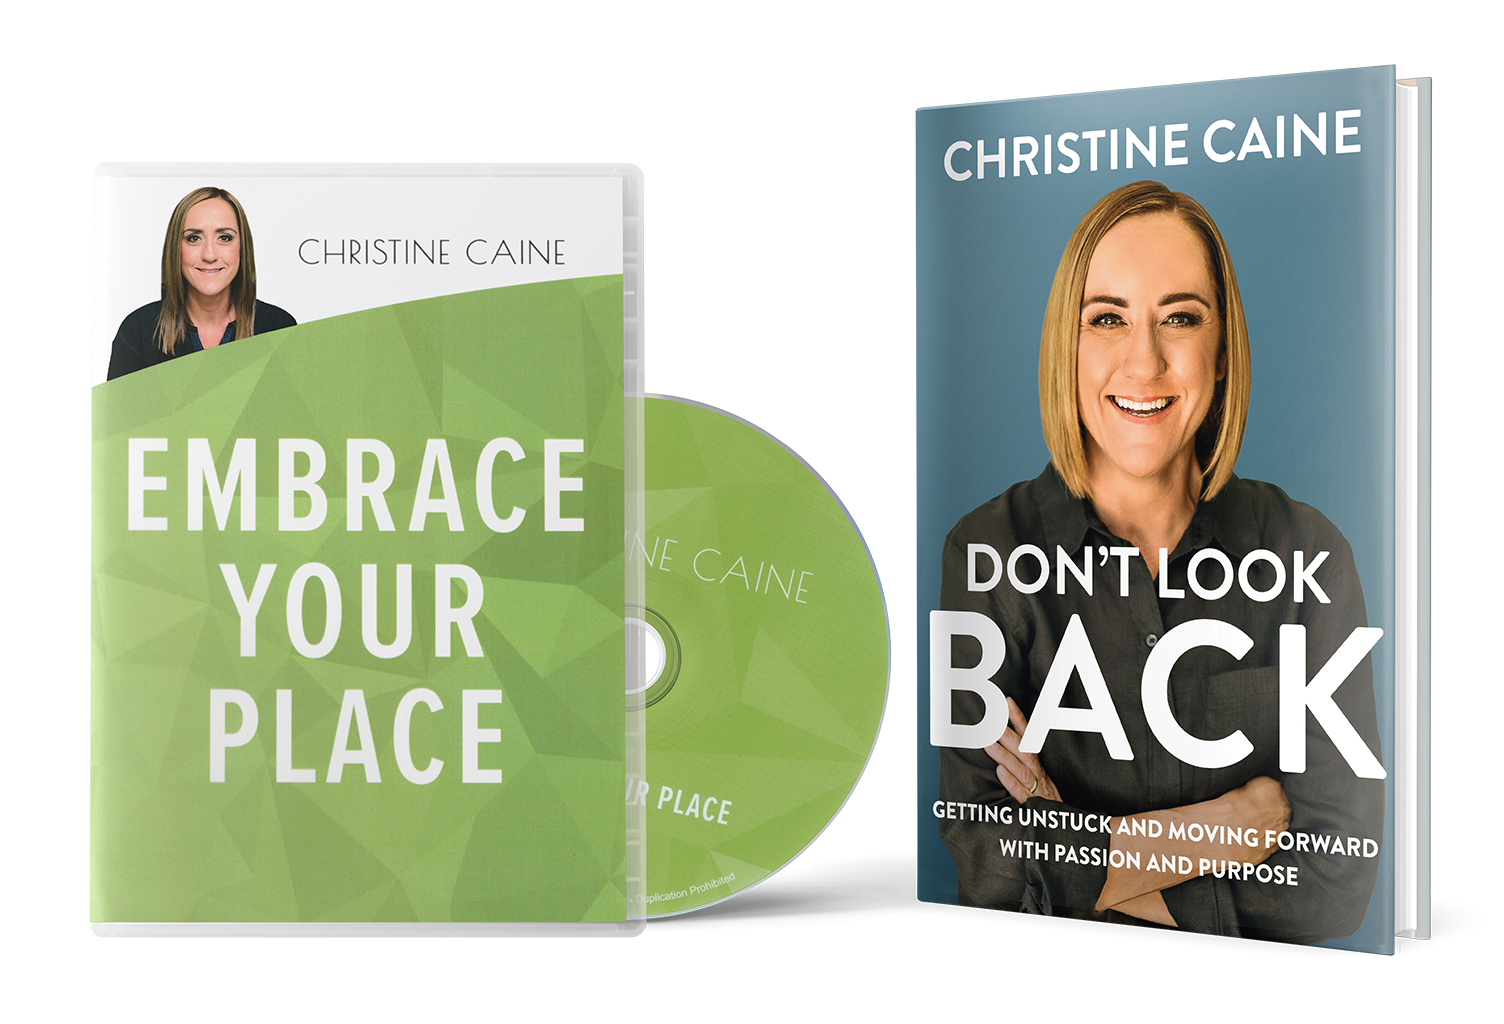 Embrace Your Place & Don't Look Back by Christine Caine by TBN